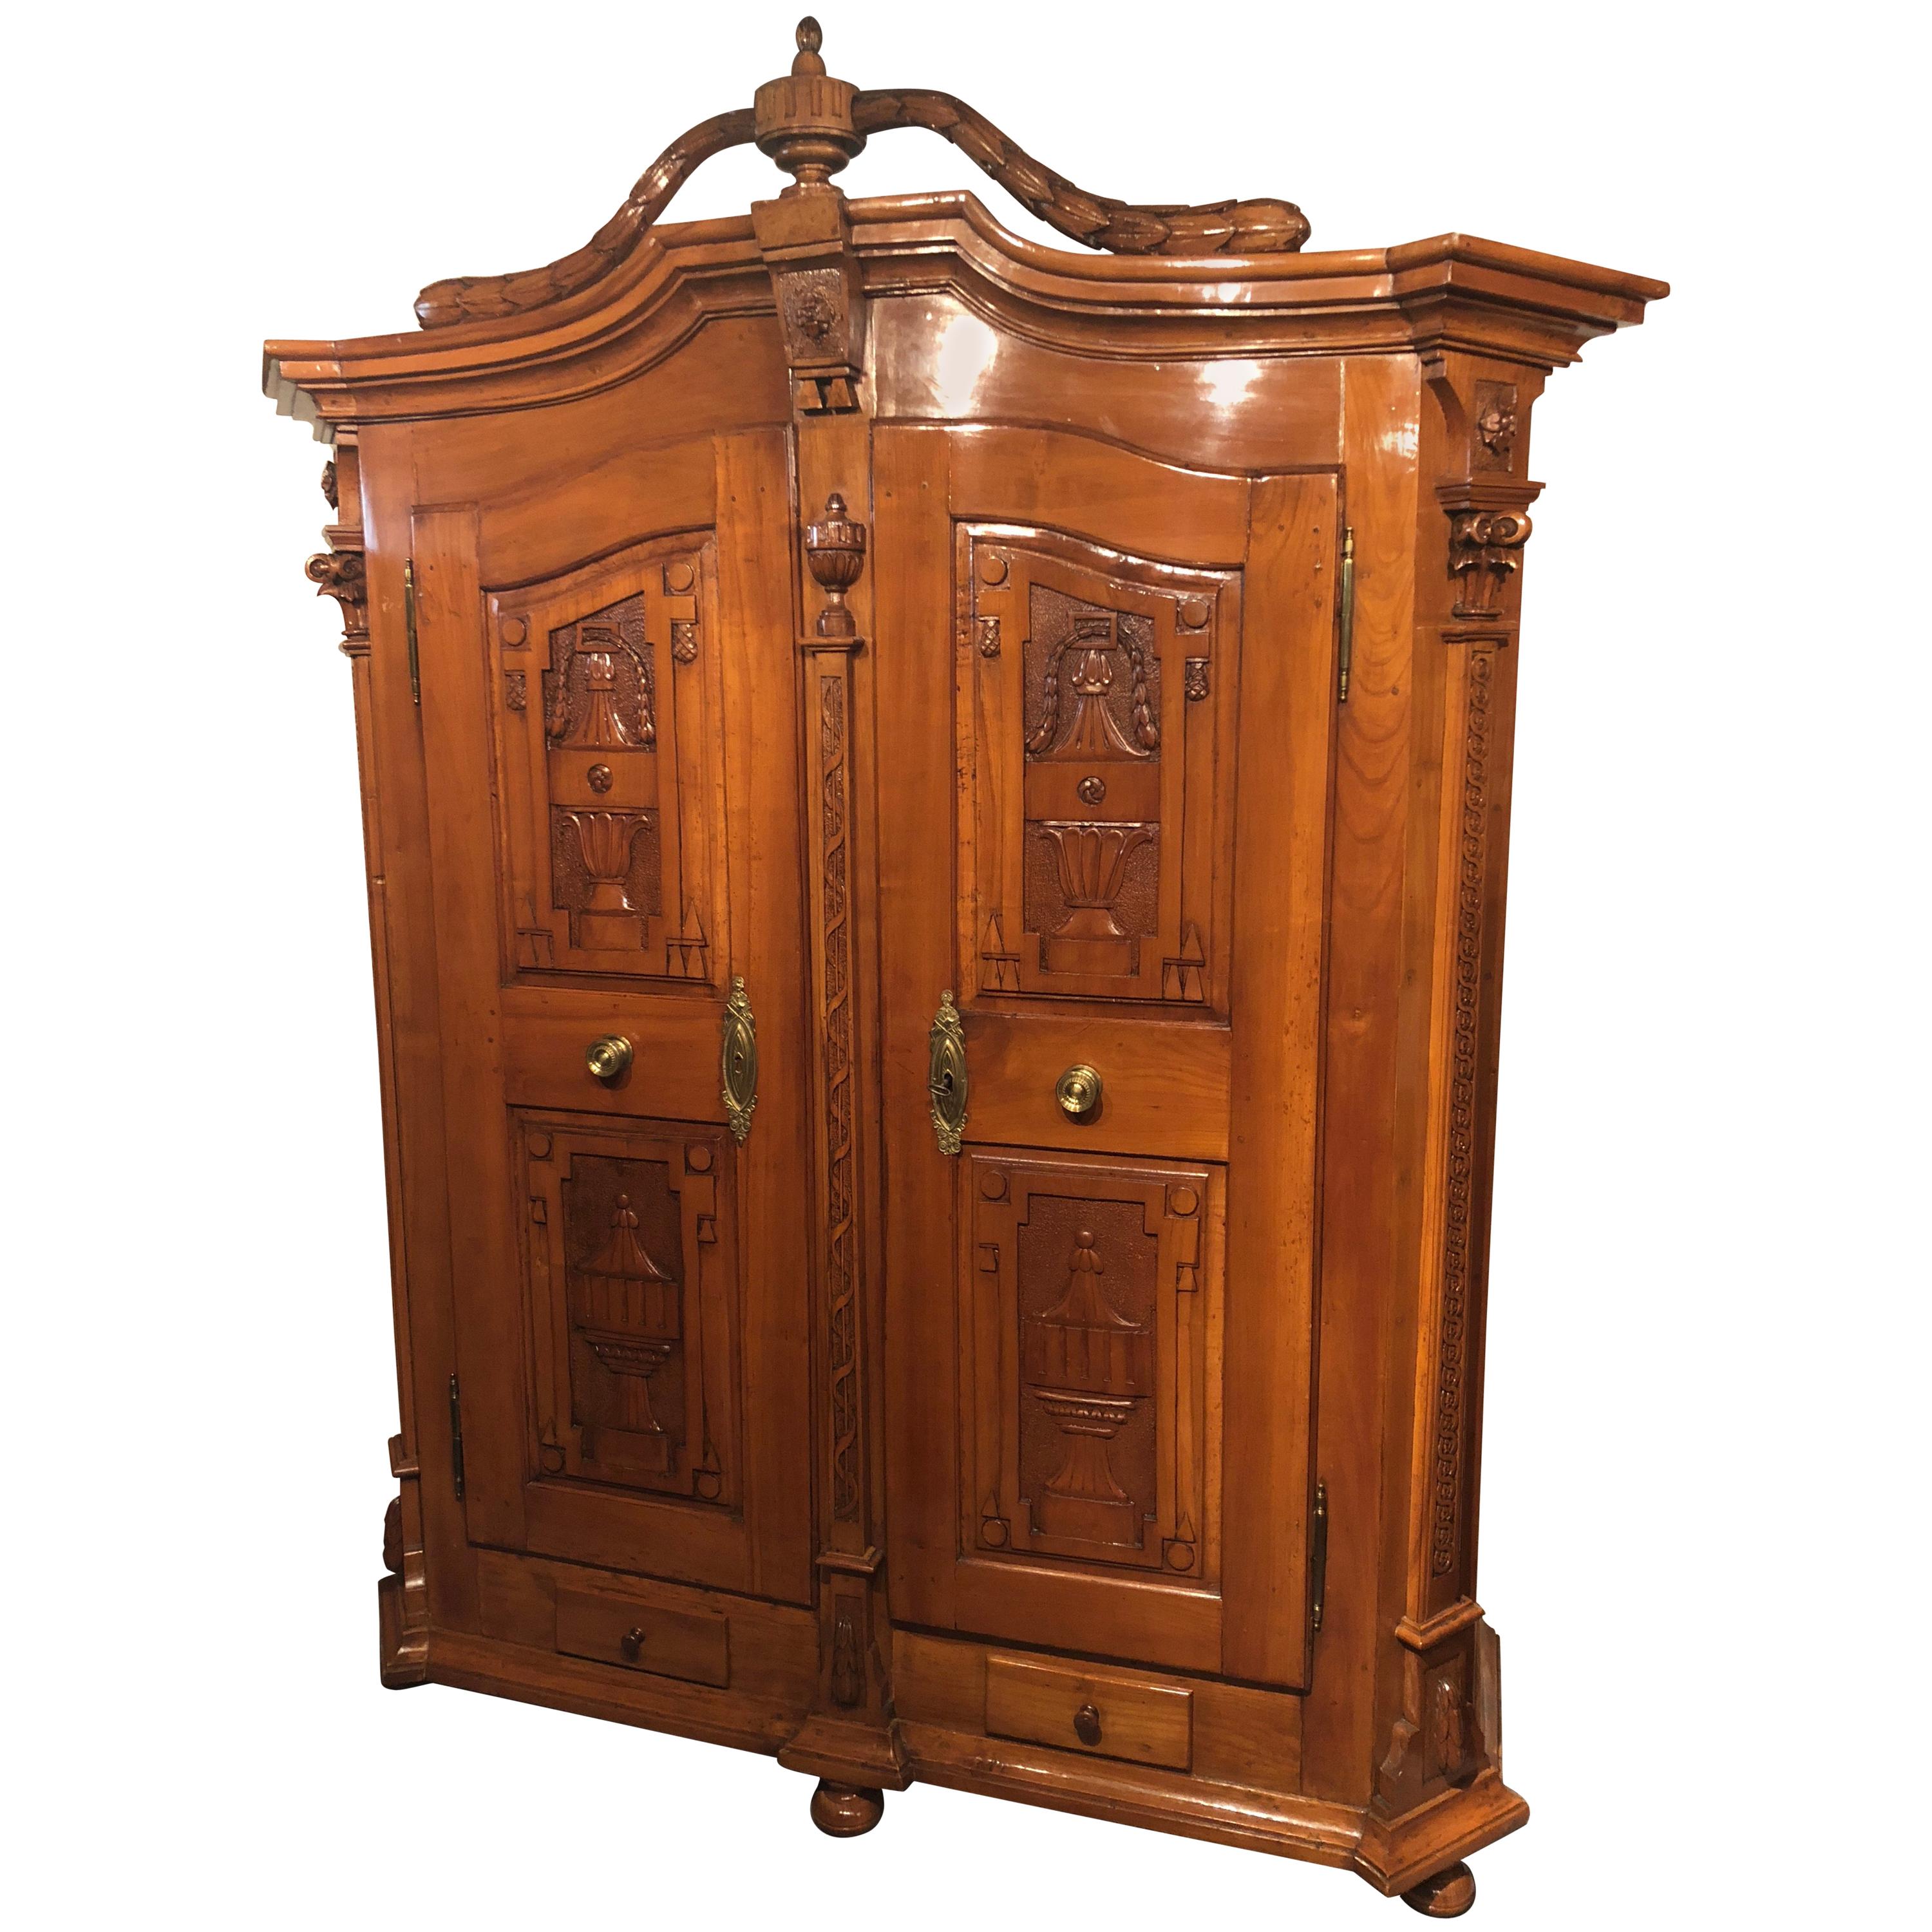 Louis XVI Armoire, Lake Constance Region, 1770-80 For Sale at 1stDibs